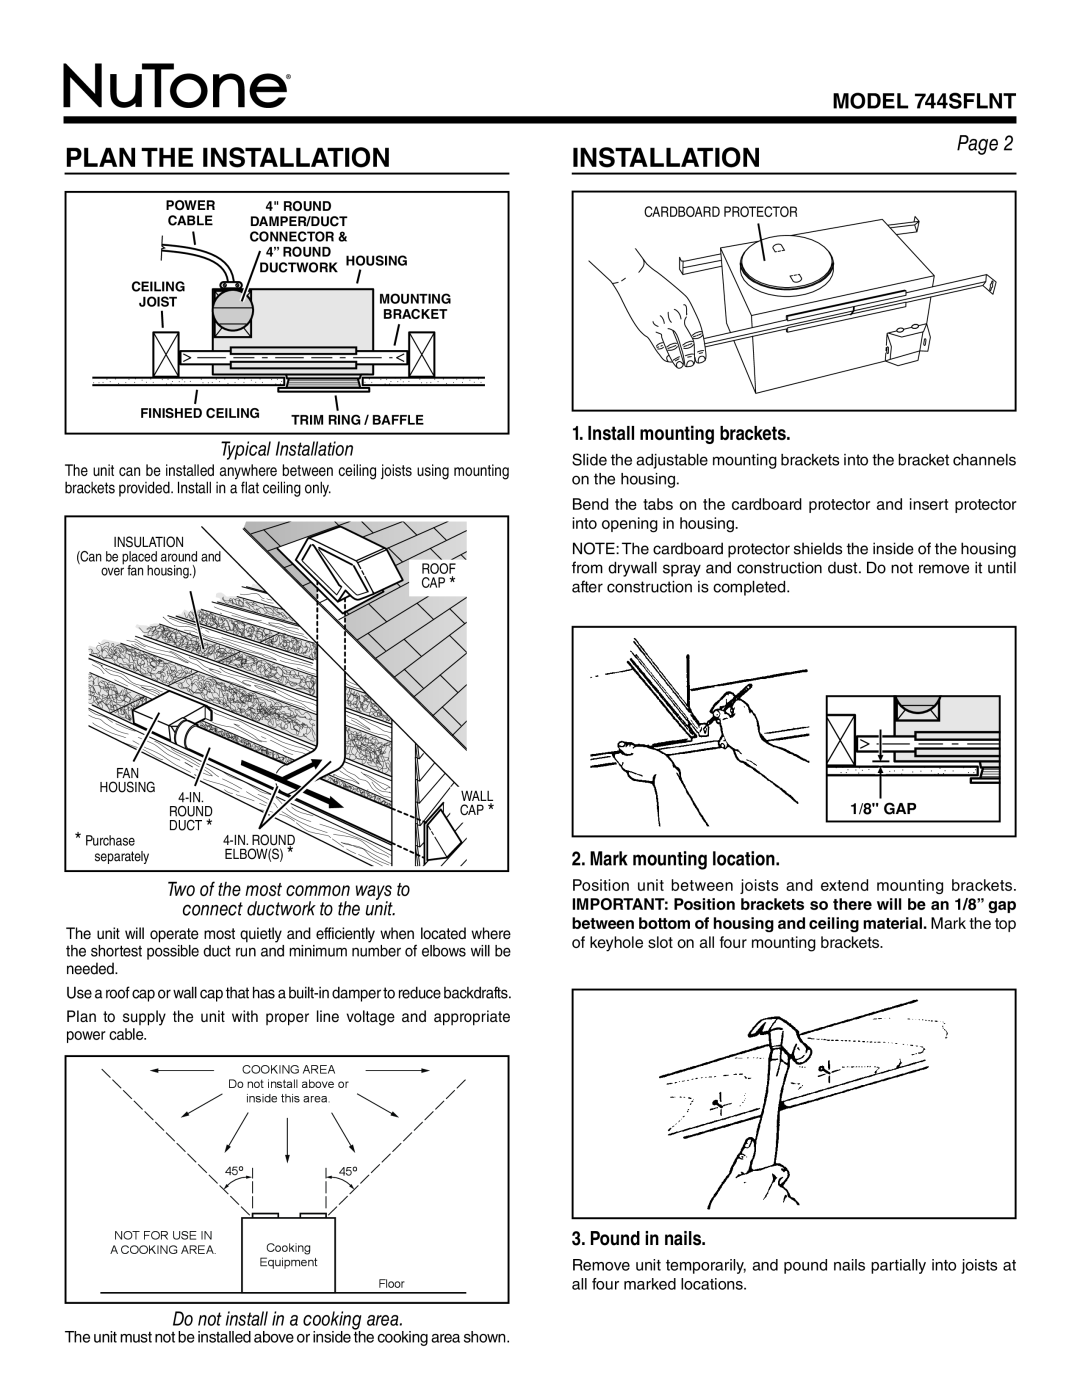 NuTone 744SFLNT Plan The Installation, Typical Installation, Do not install in a cooking area, Install mounting brackets 